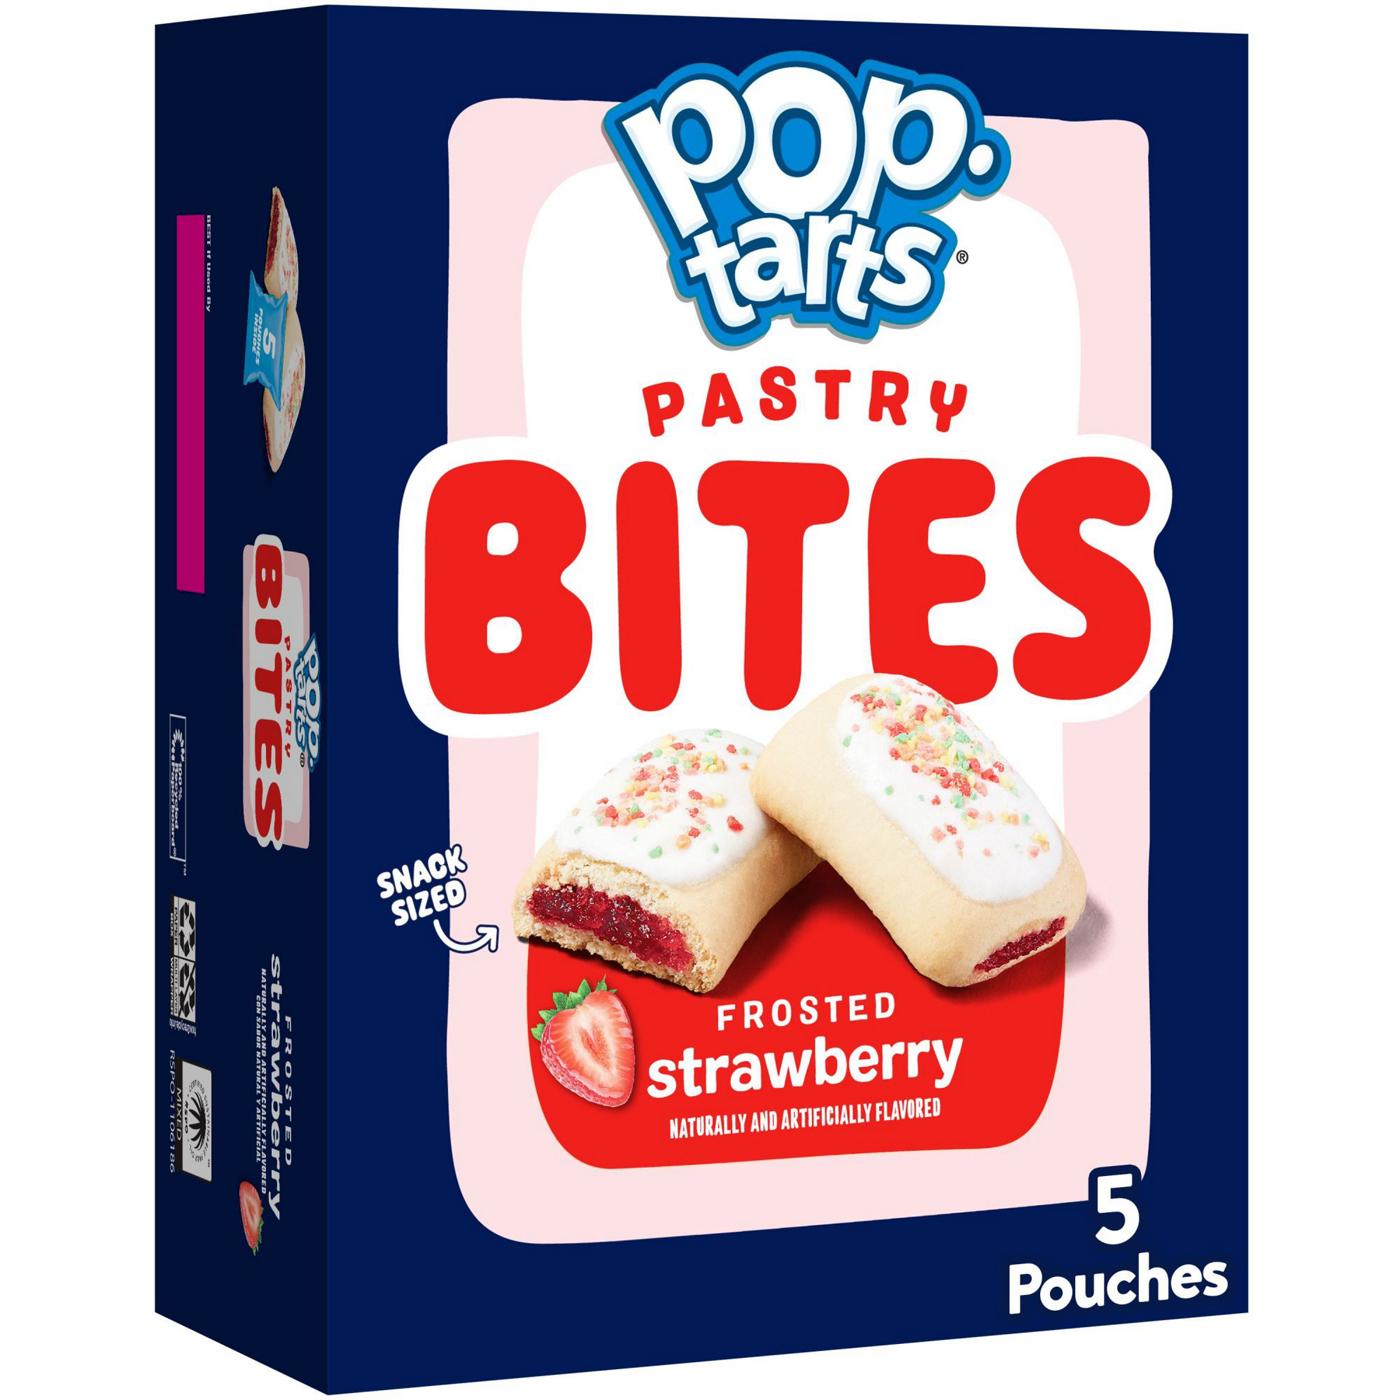 Pop-Tarts Frosted Strawberry Baked Pastry Bites; image 6 of 6